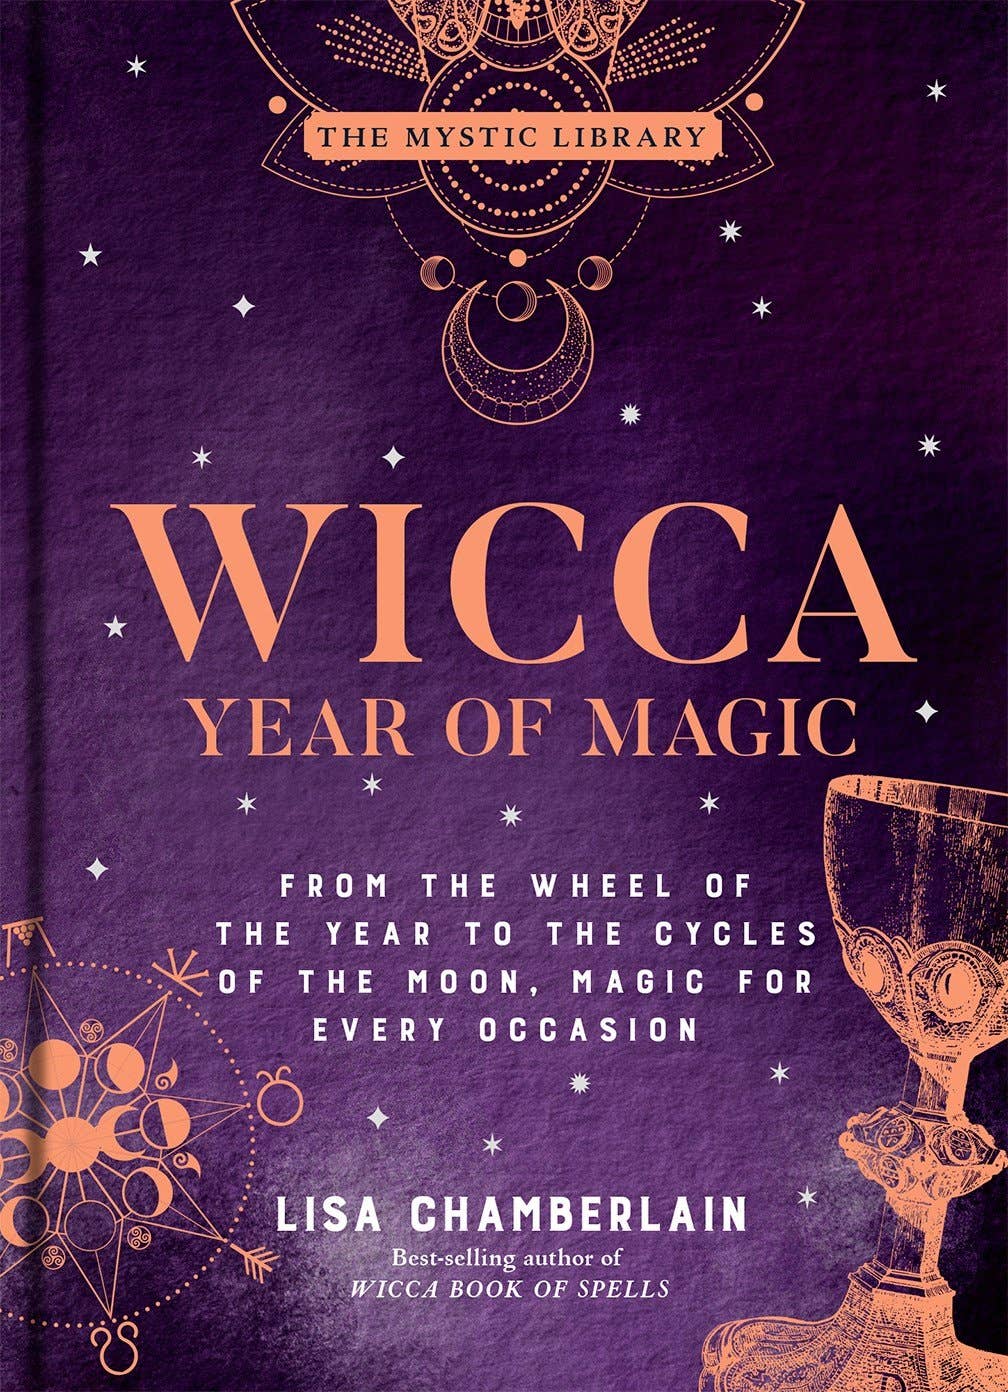 Wicca Year of Magic: Wheel of the Year to Cycles of the Moon